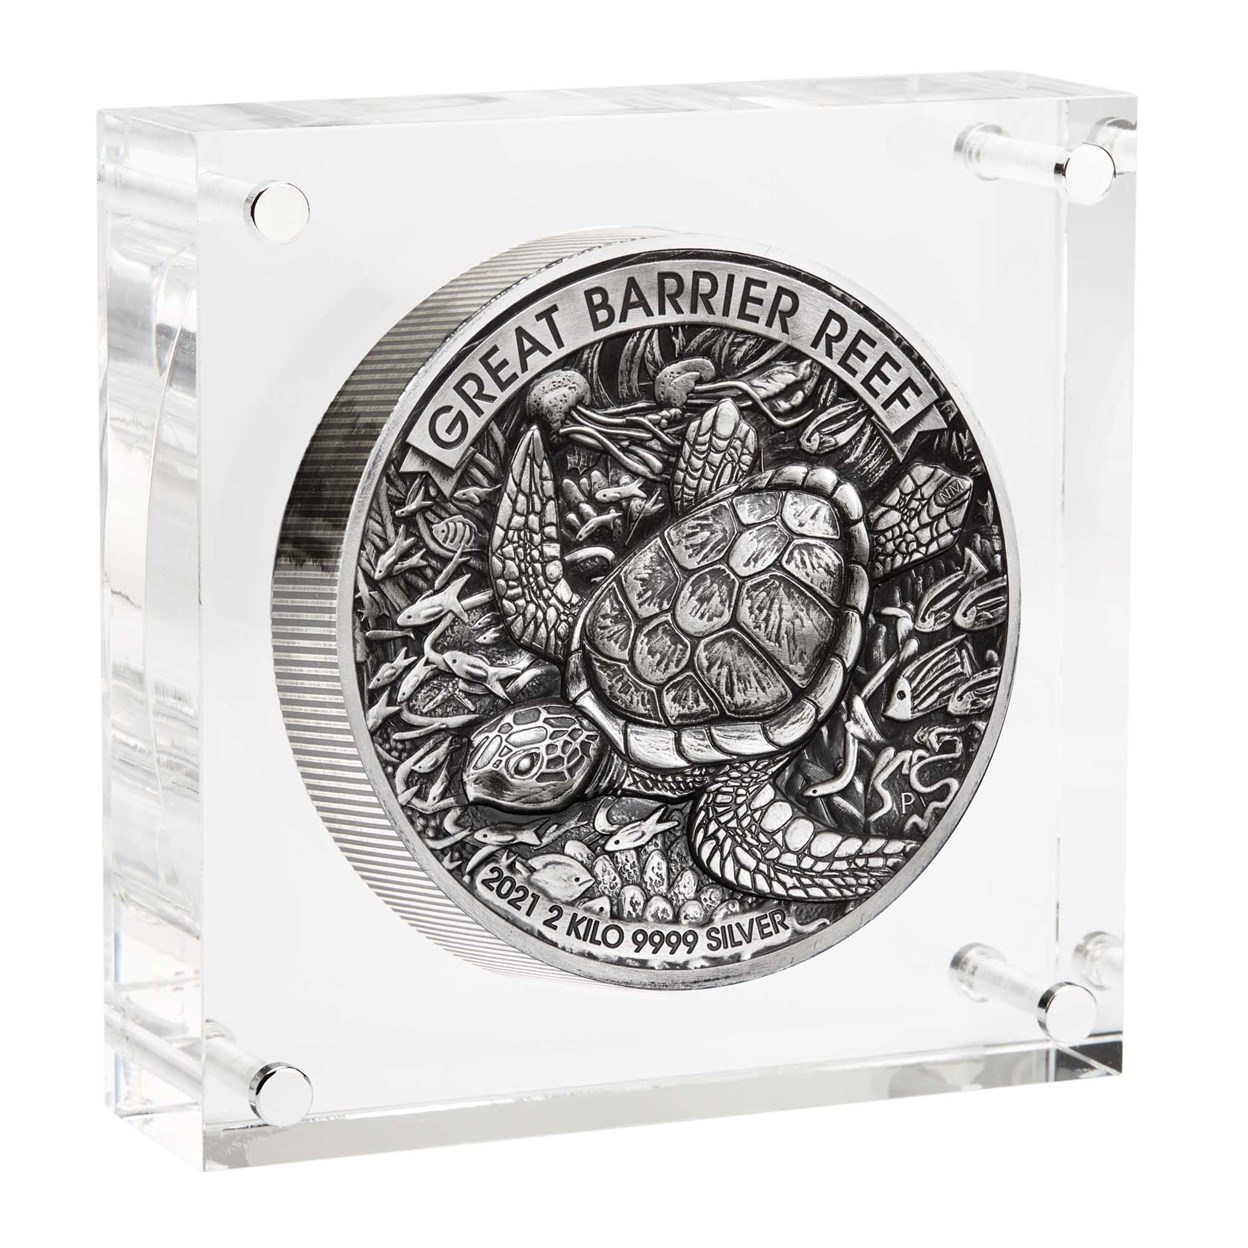 07 2021 Great Barrier Reef 2 Kilo Silver Antiqued High Relief Coin InPerspex HighRes